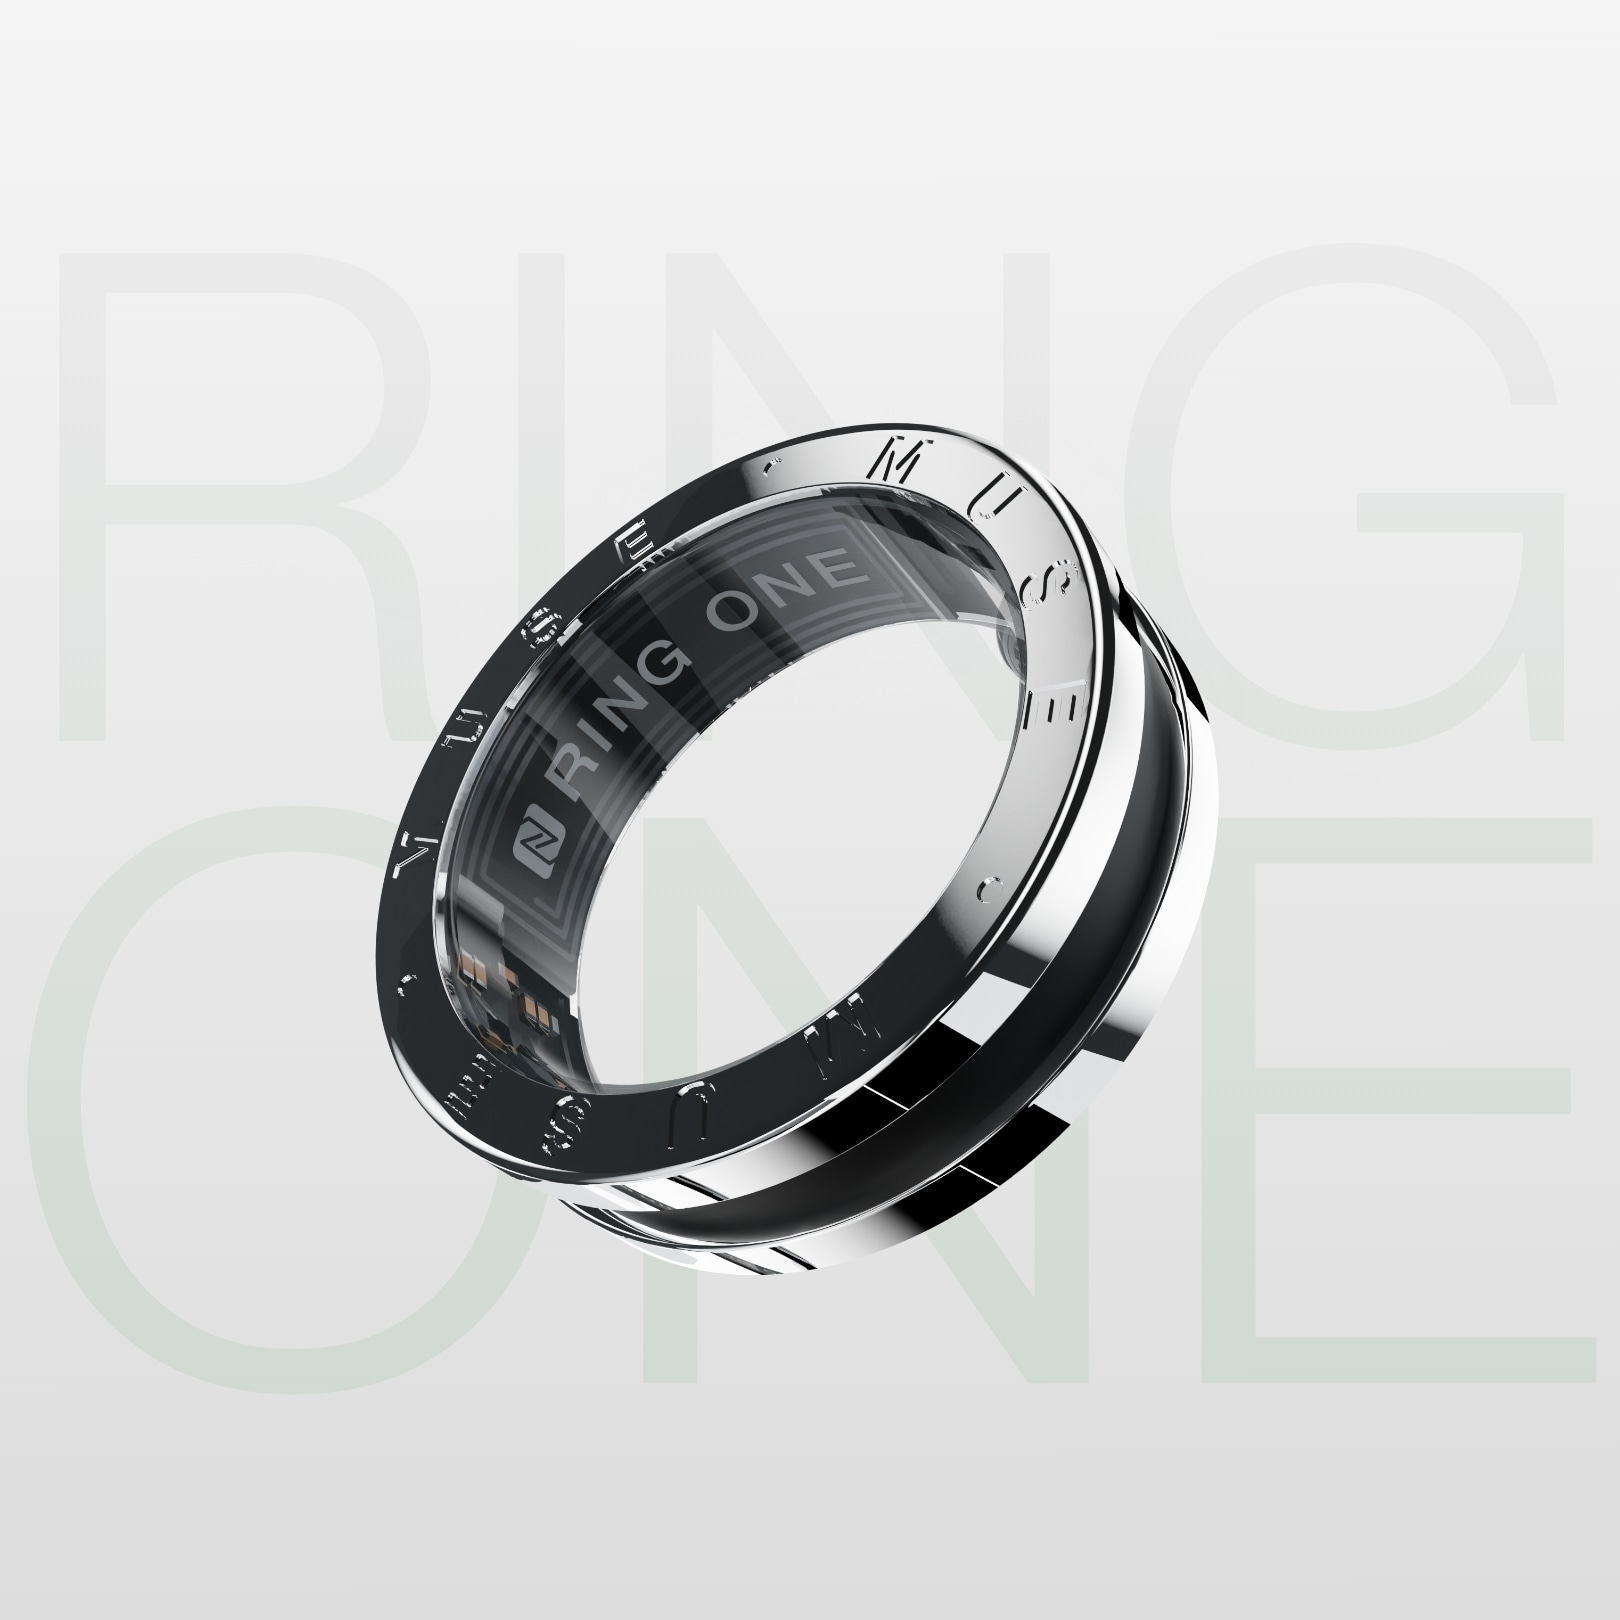 NFC Smart Rings – The Four Applications that Make Your Daily Life Easier